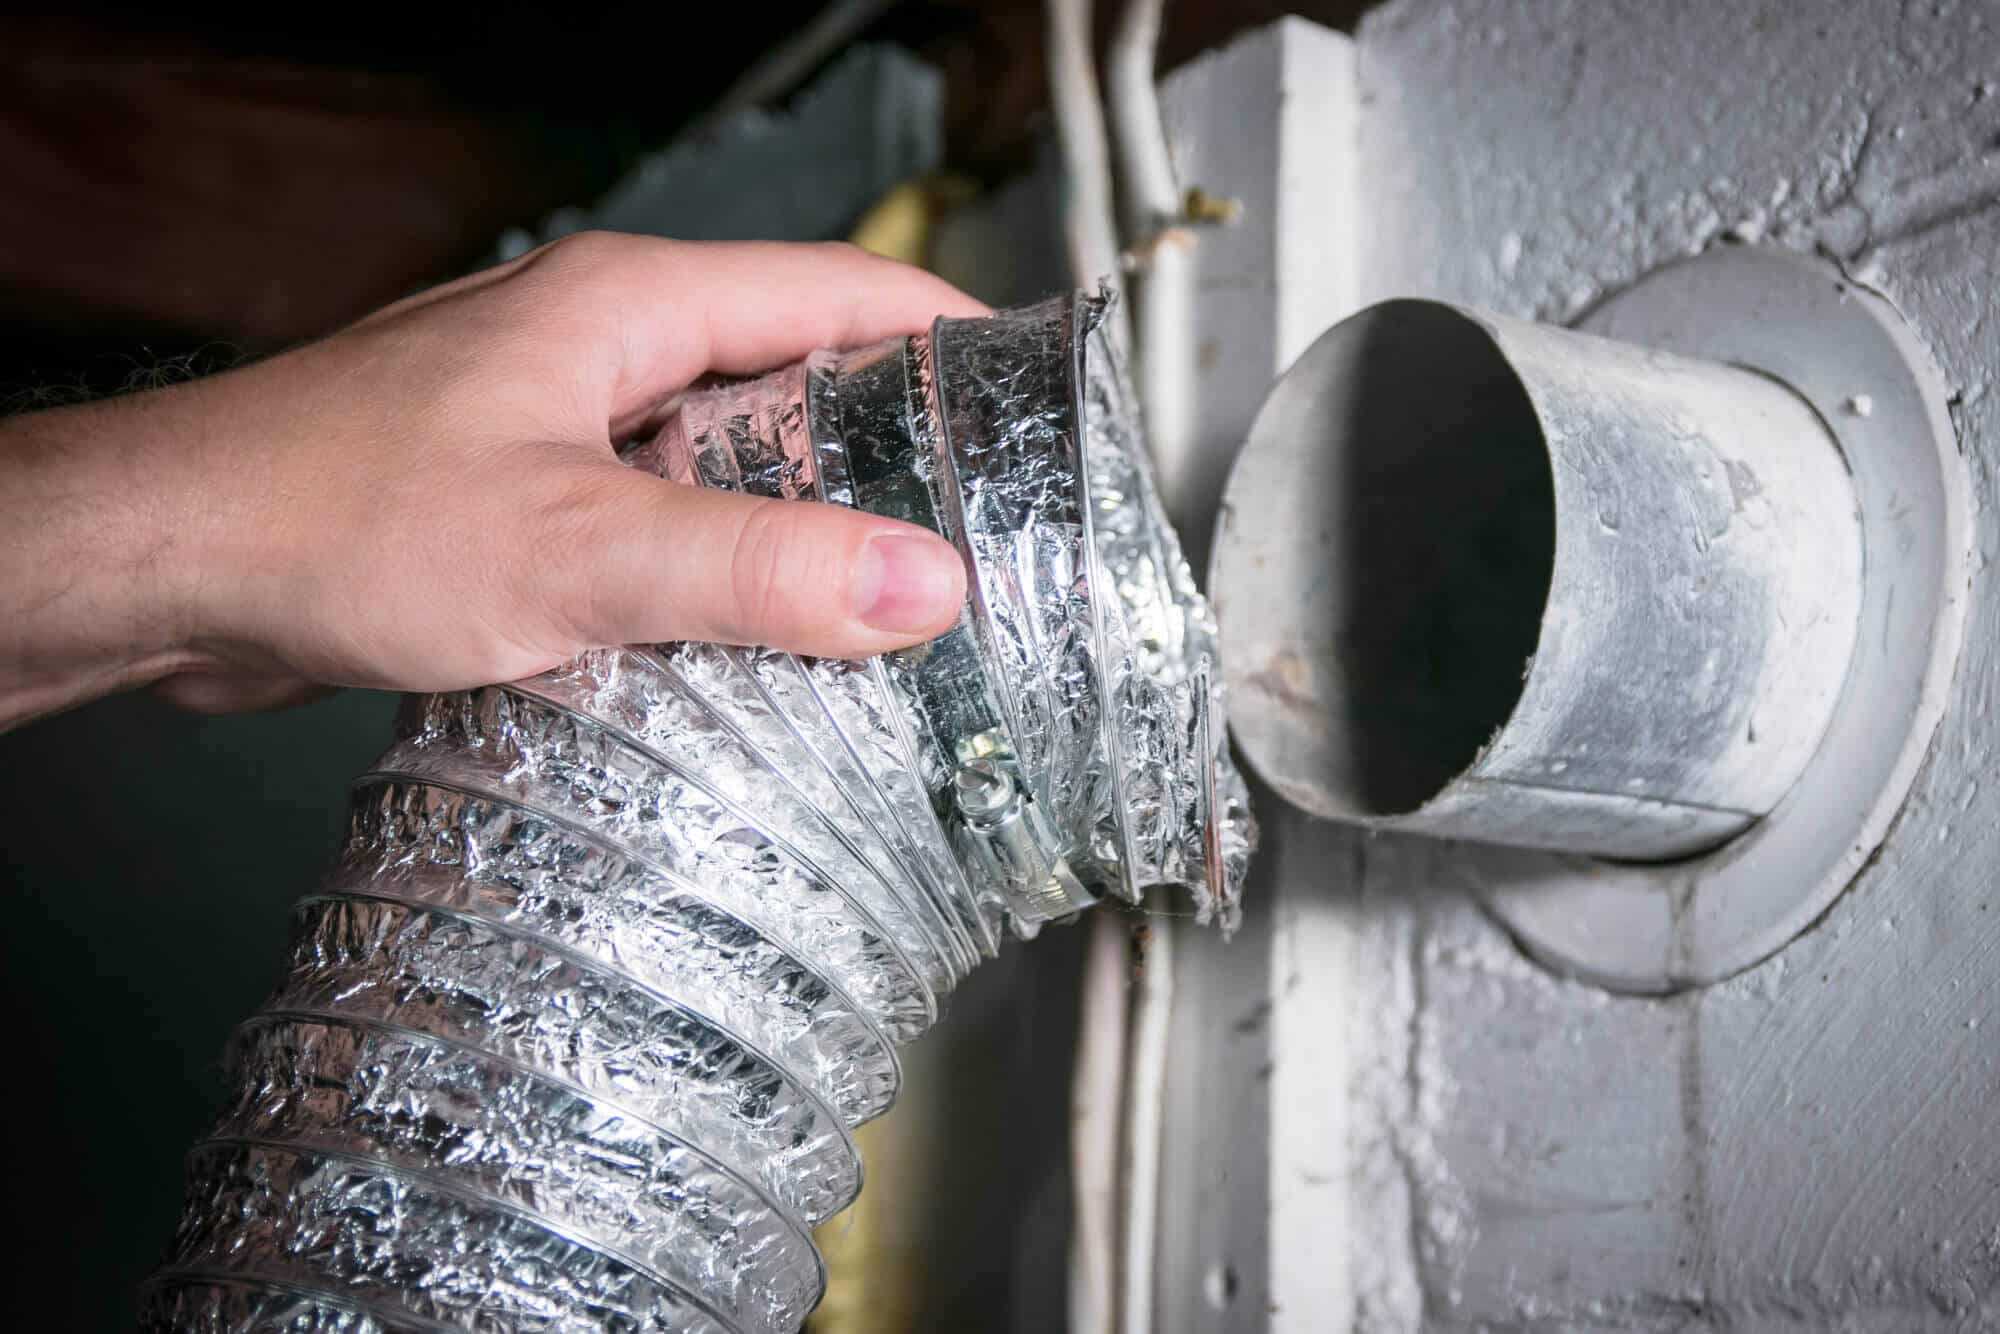 Why Is Dryer Vent Cleaning Important? Dryer Vent Issues